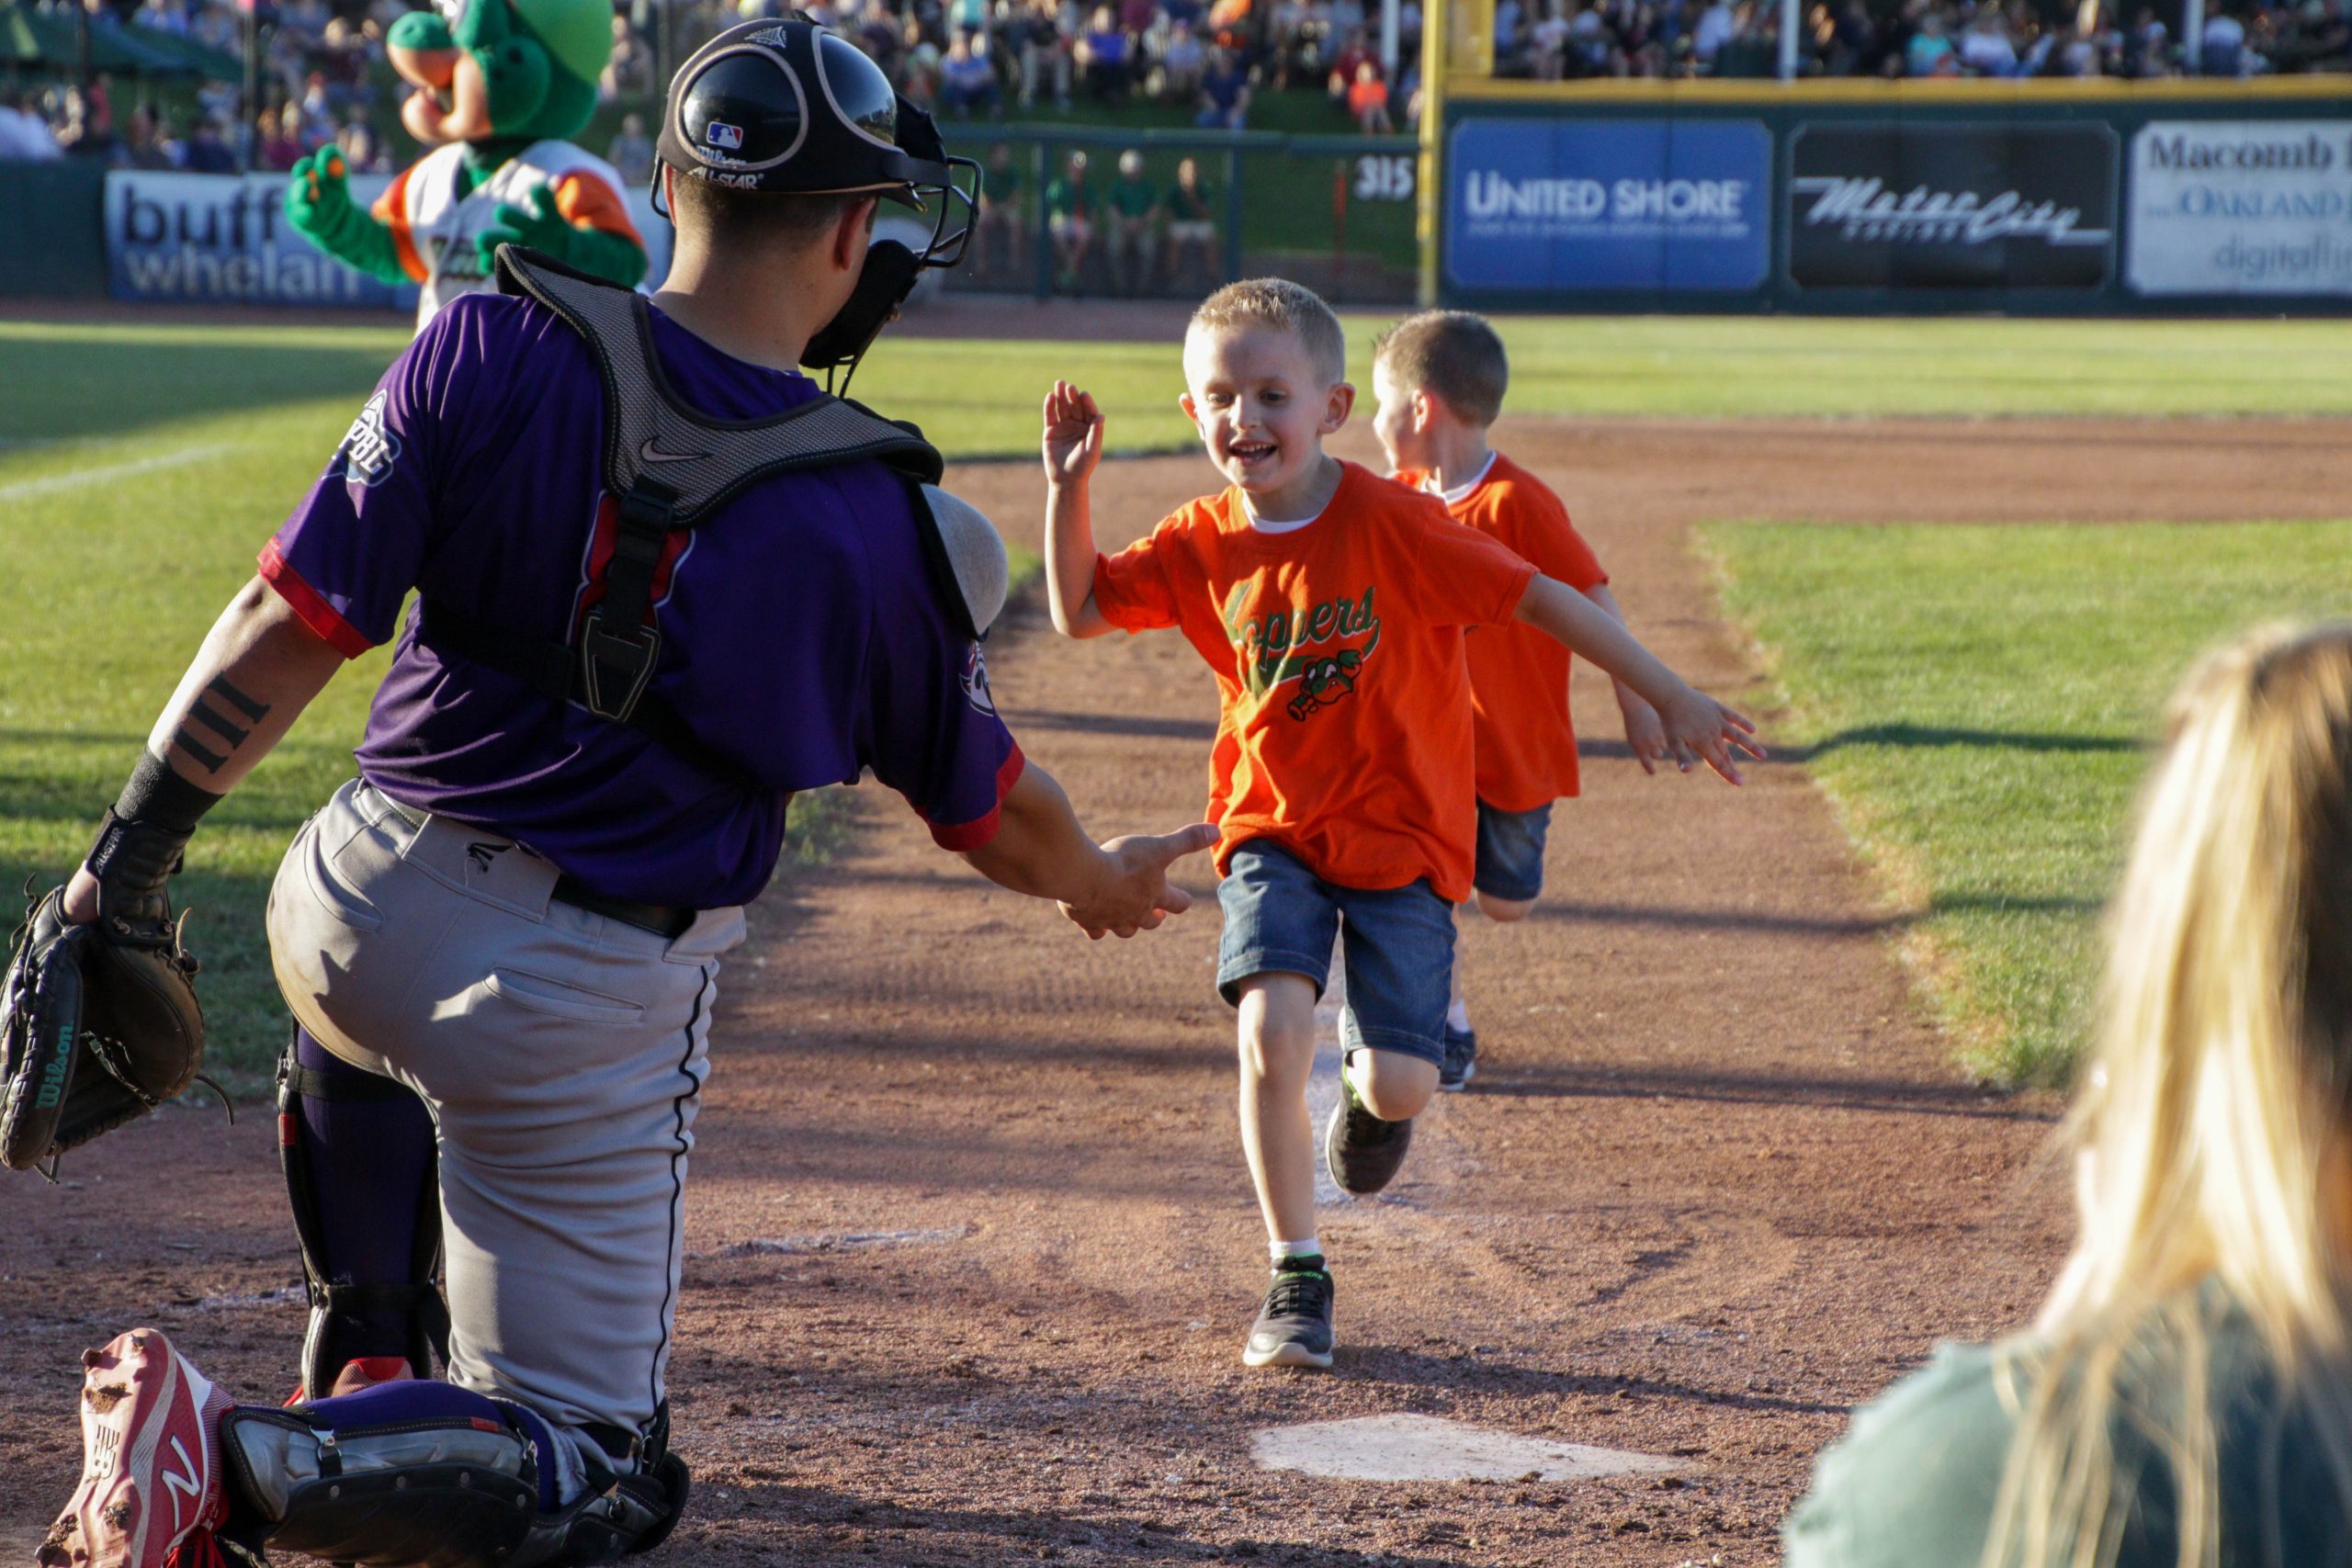 Upcoming Promotions - Aug. 30-Sept. 2 - USPBL